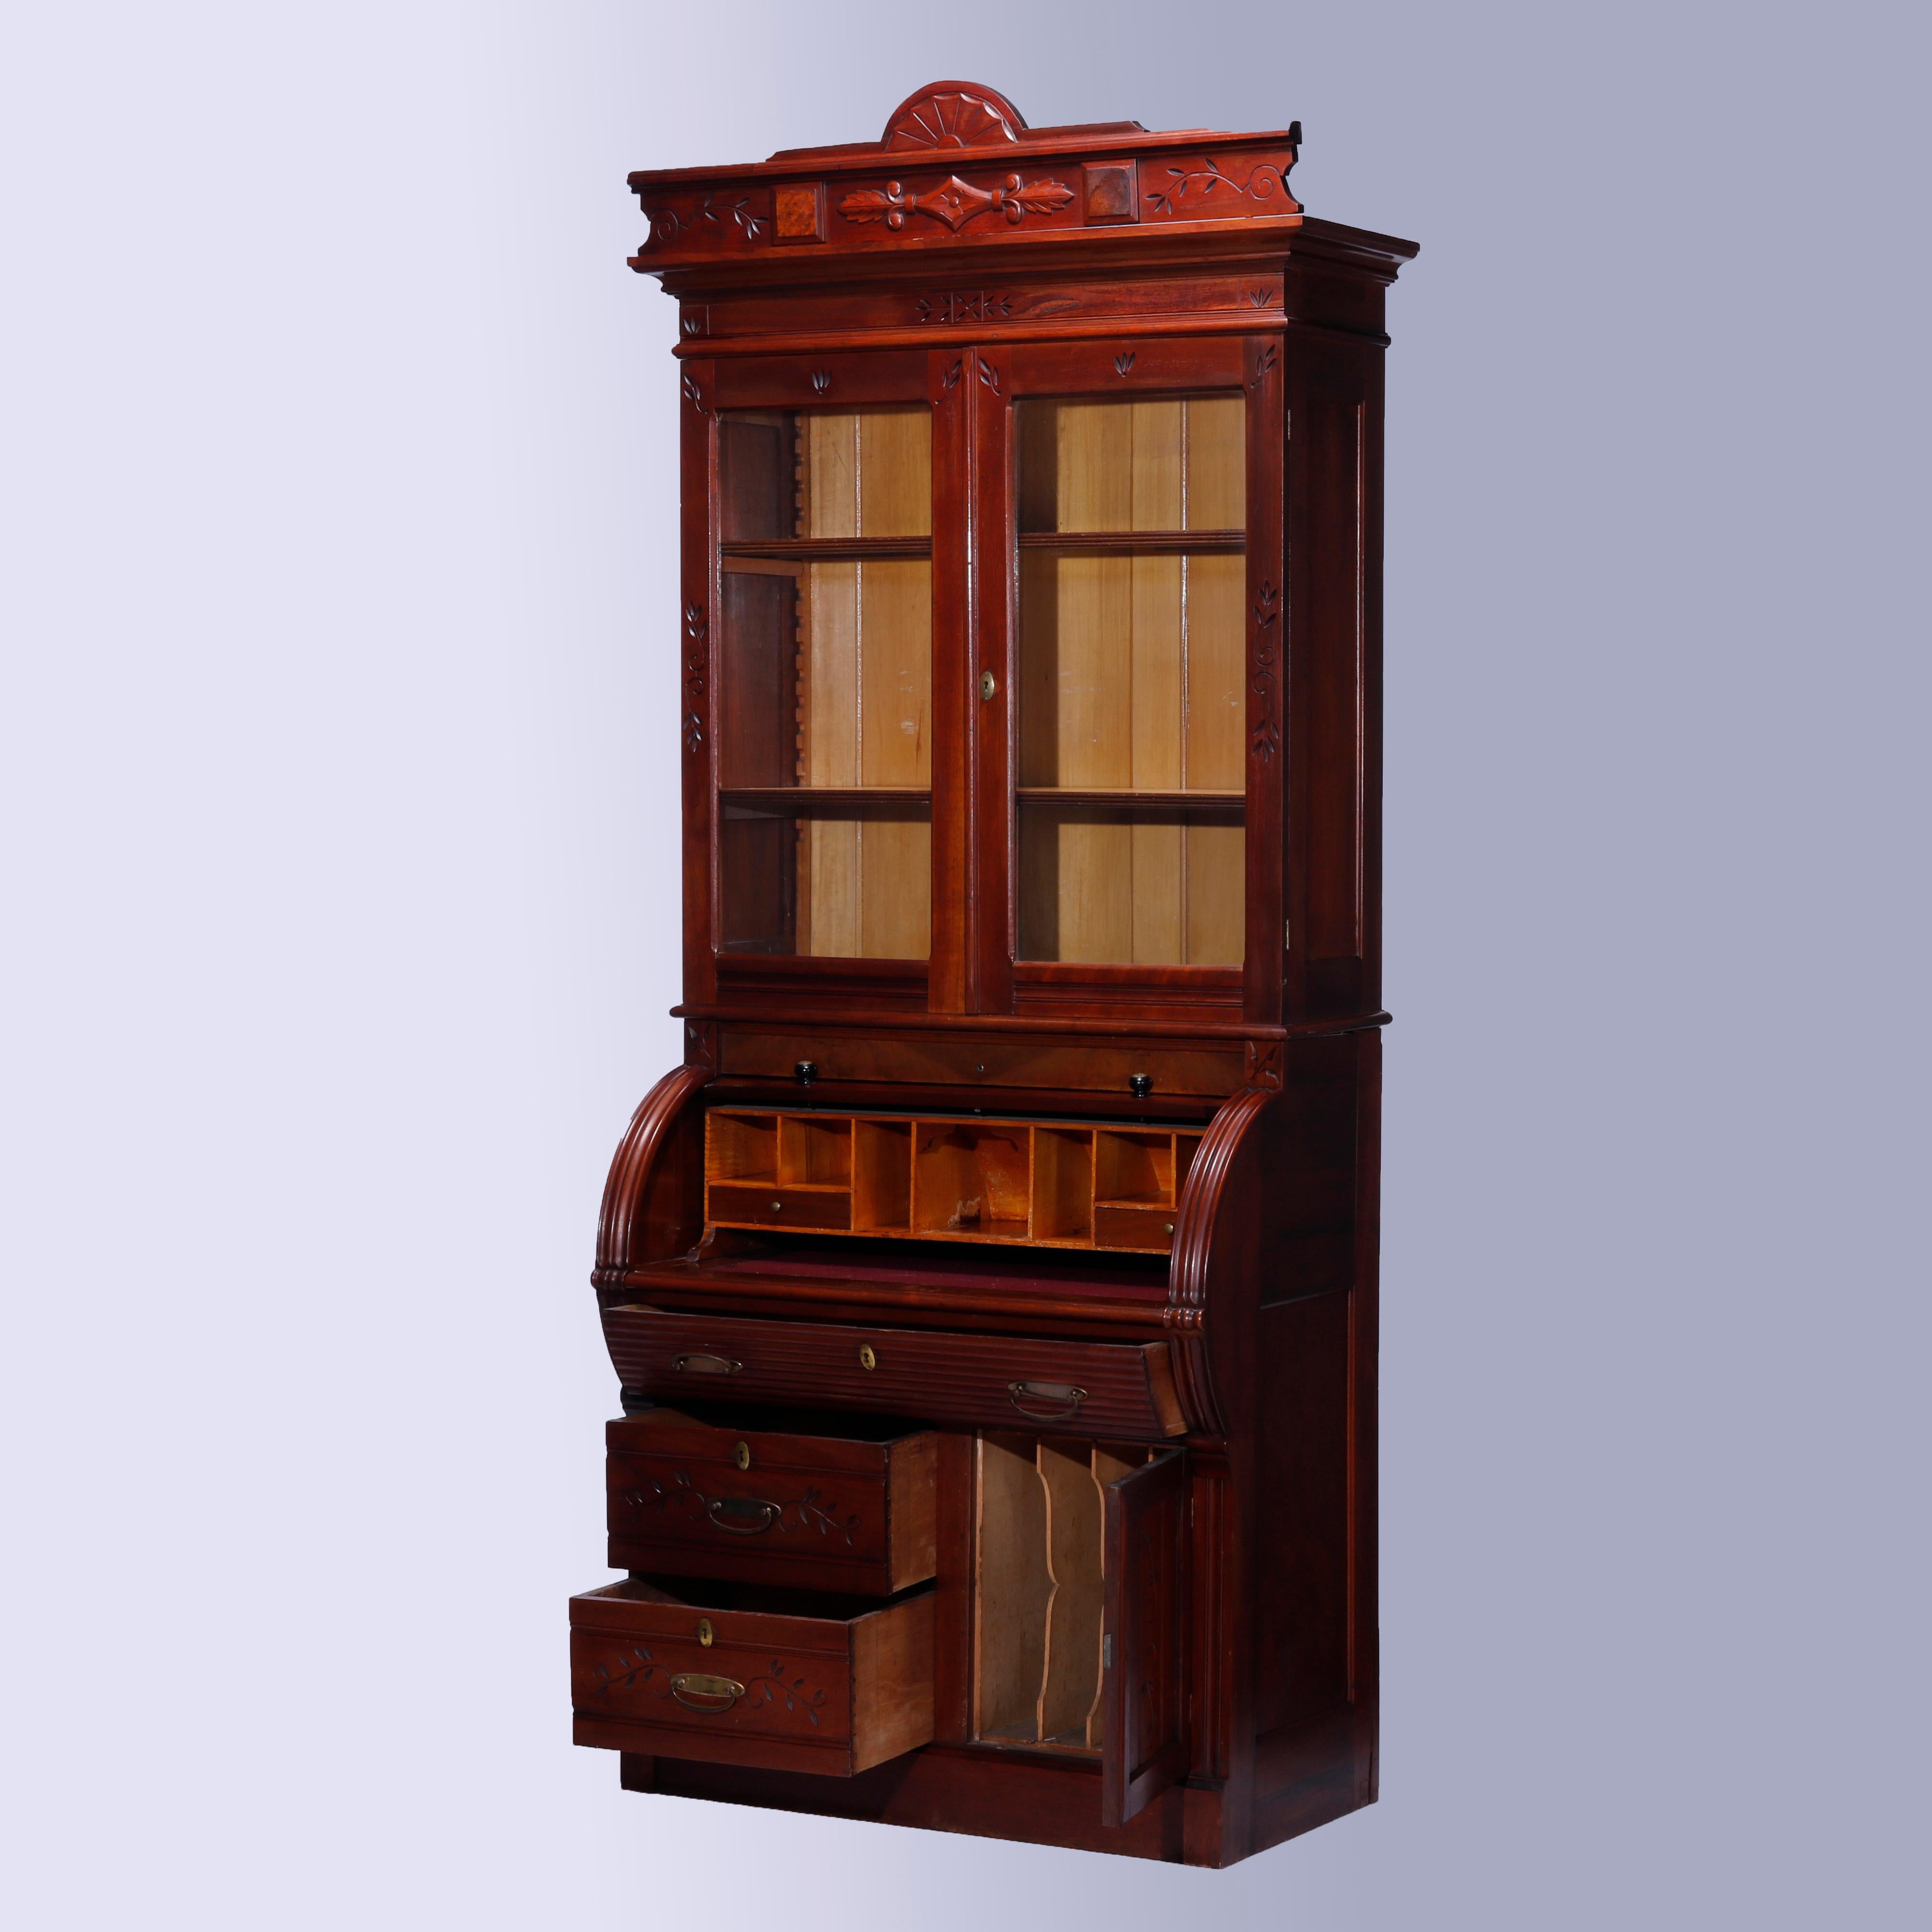 An antique Eastlake secretary offers walnut construction with carved sunburst crest over double glass door bookcase with adjustable shelves surmounting barrel roll desk opening to pull-out writing surface and pigeon holes storage compartments over